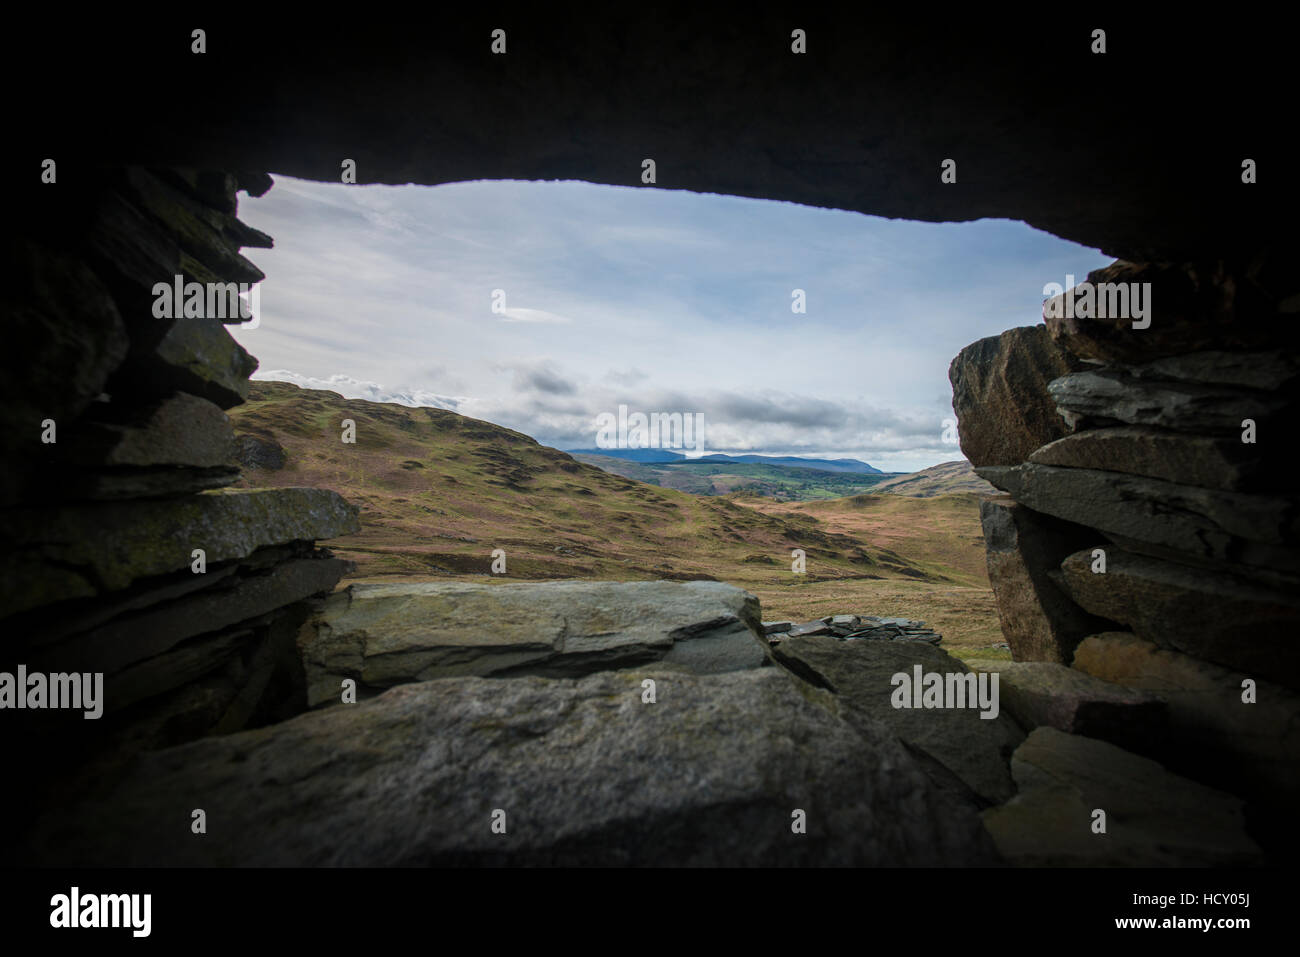 Looking through a window of a crumbling stone house on Place Fell in the English Lake District, Cumbria, UK Stock Photo